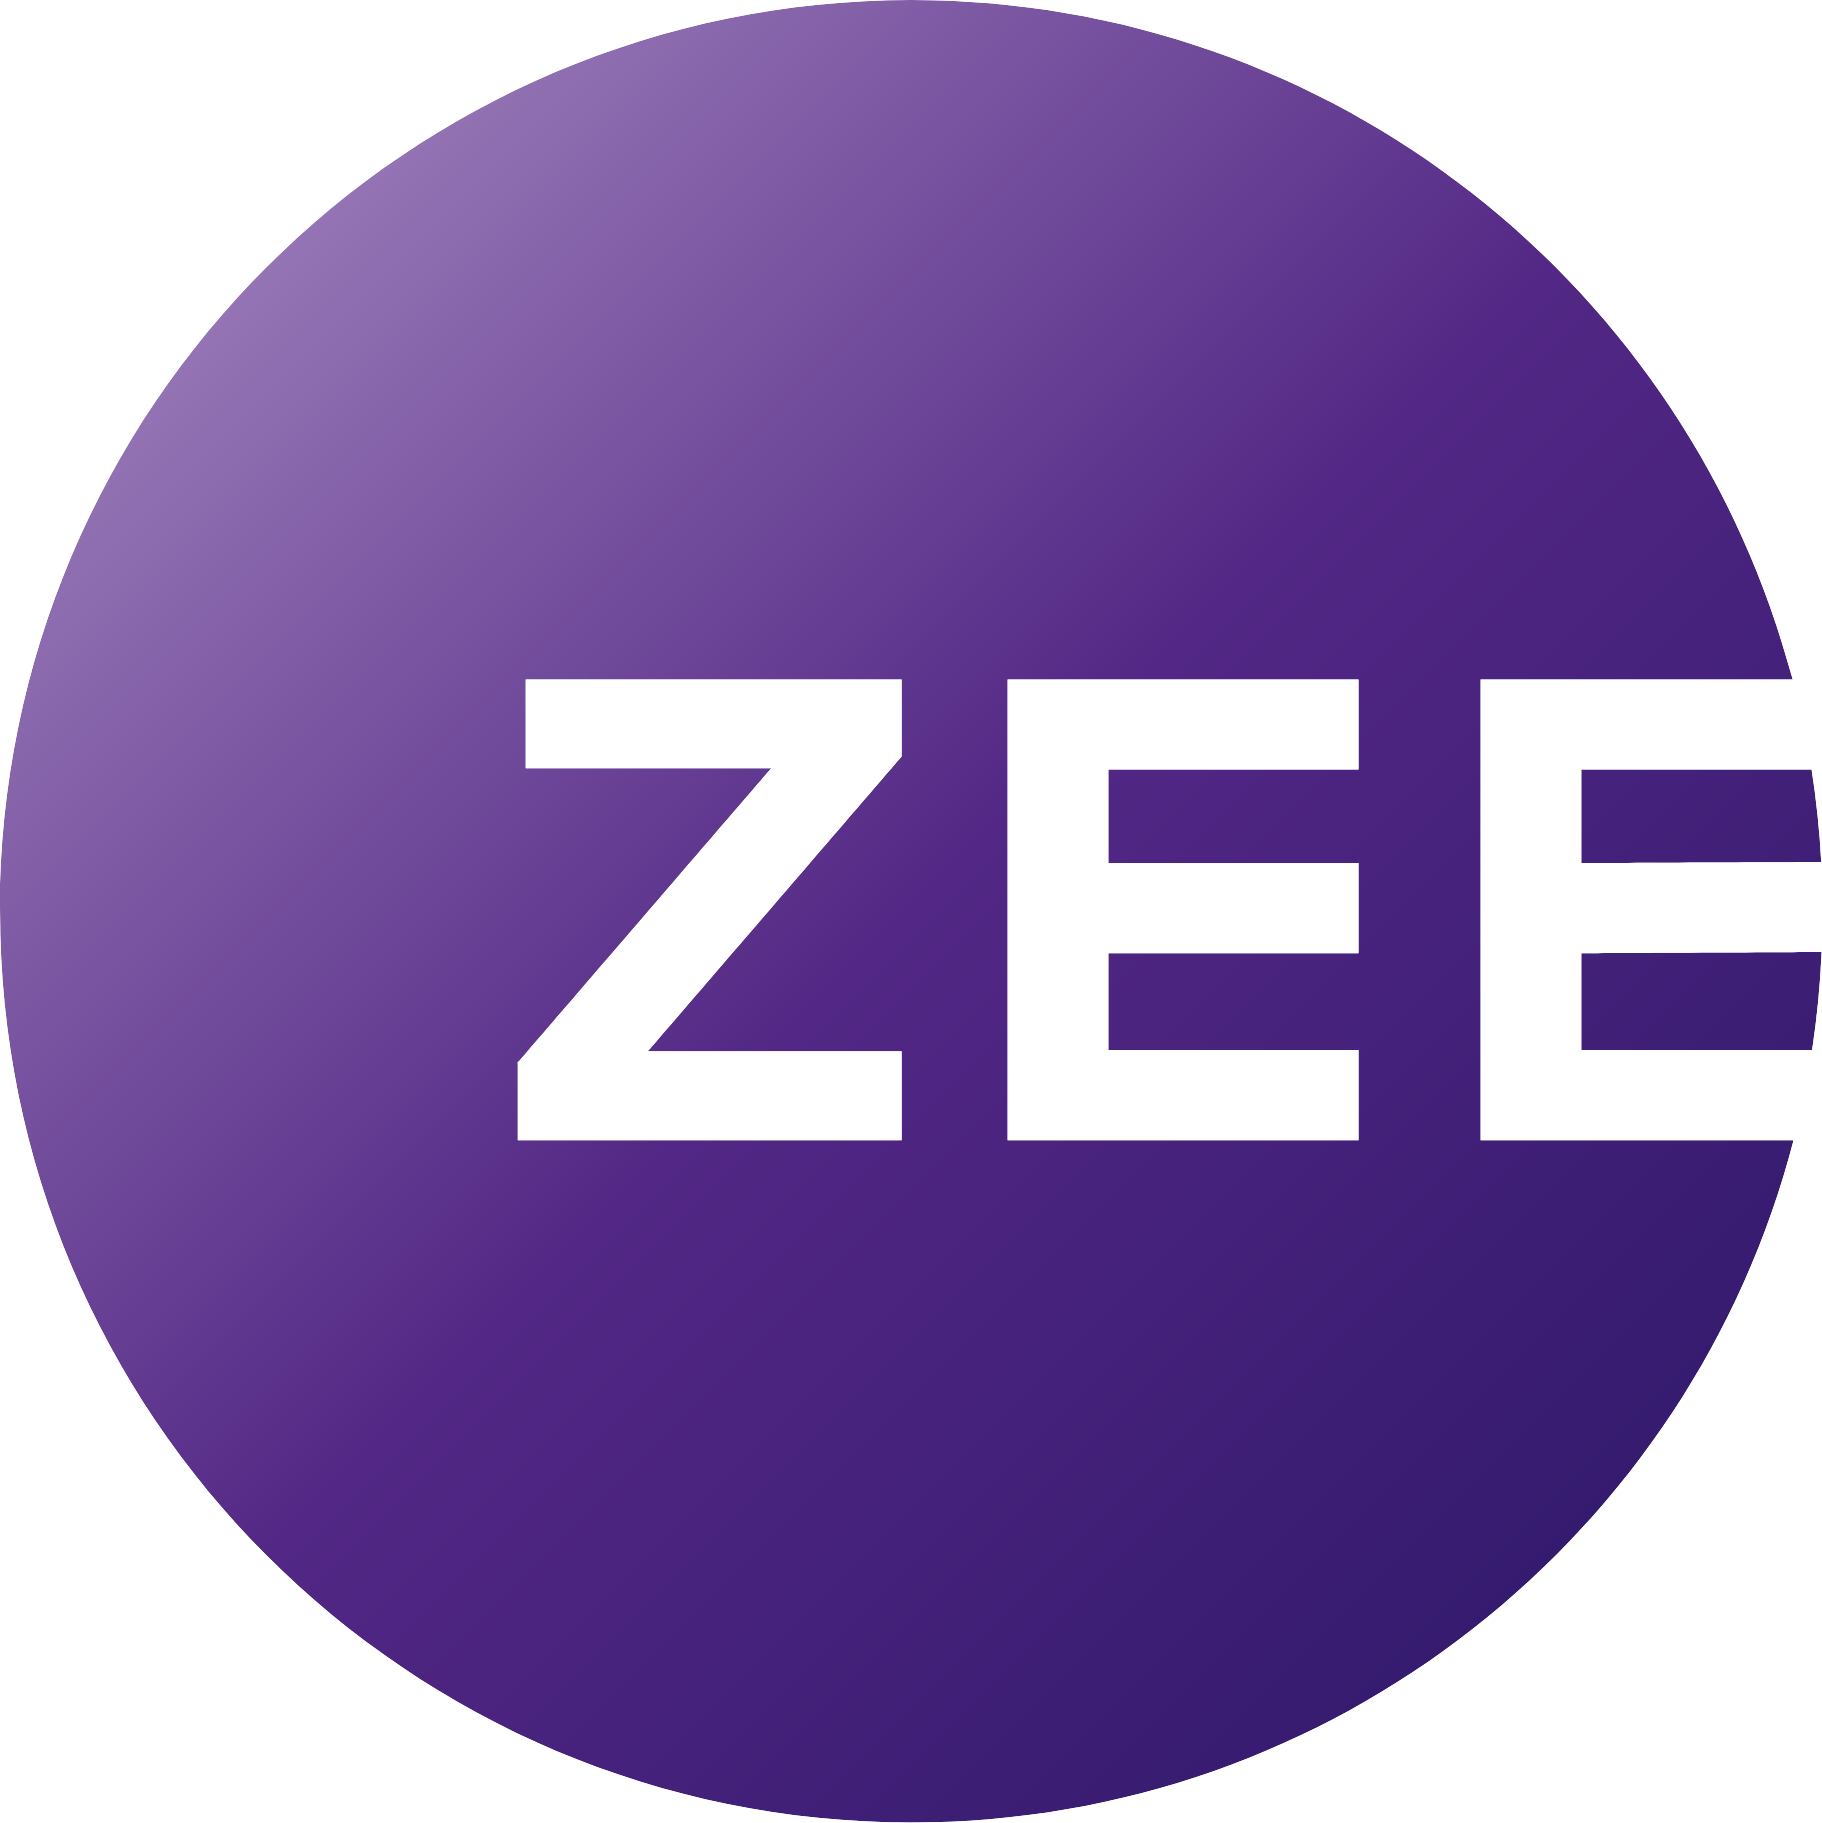 Zee Entertainment logo in transparent PNG format